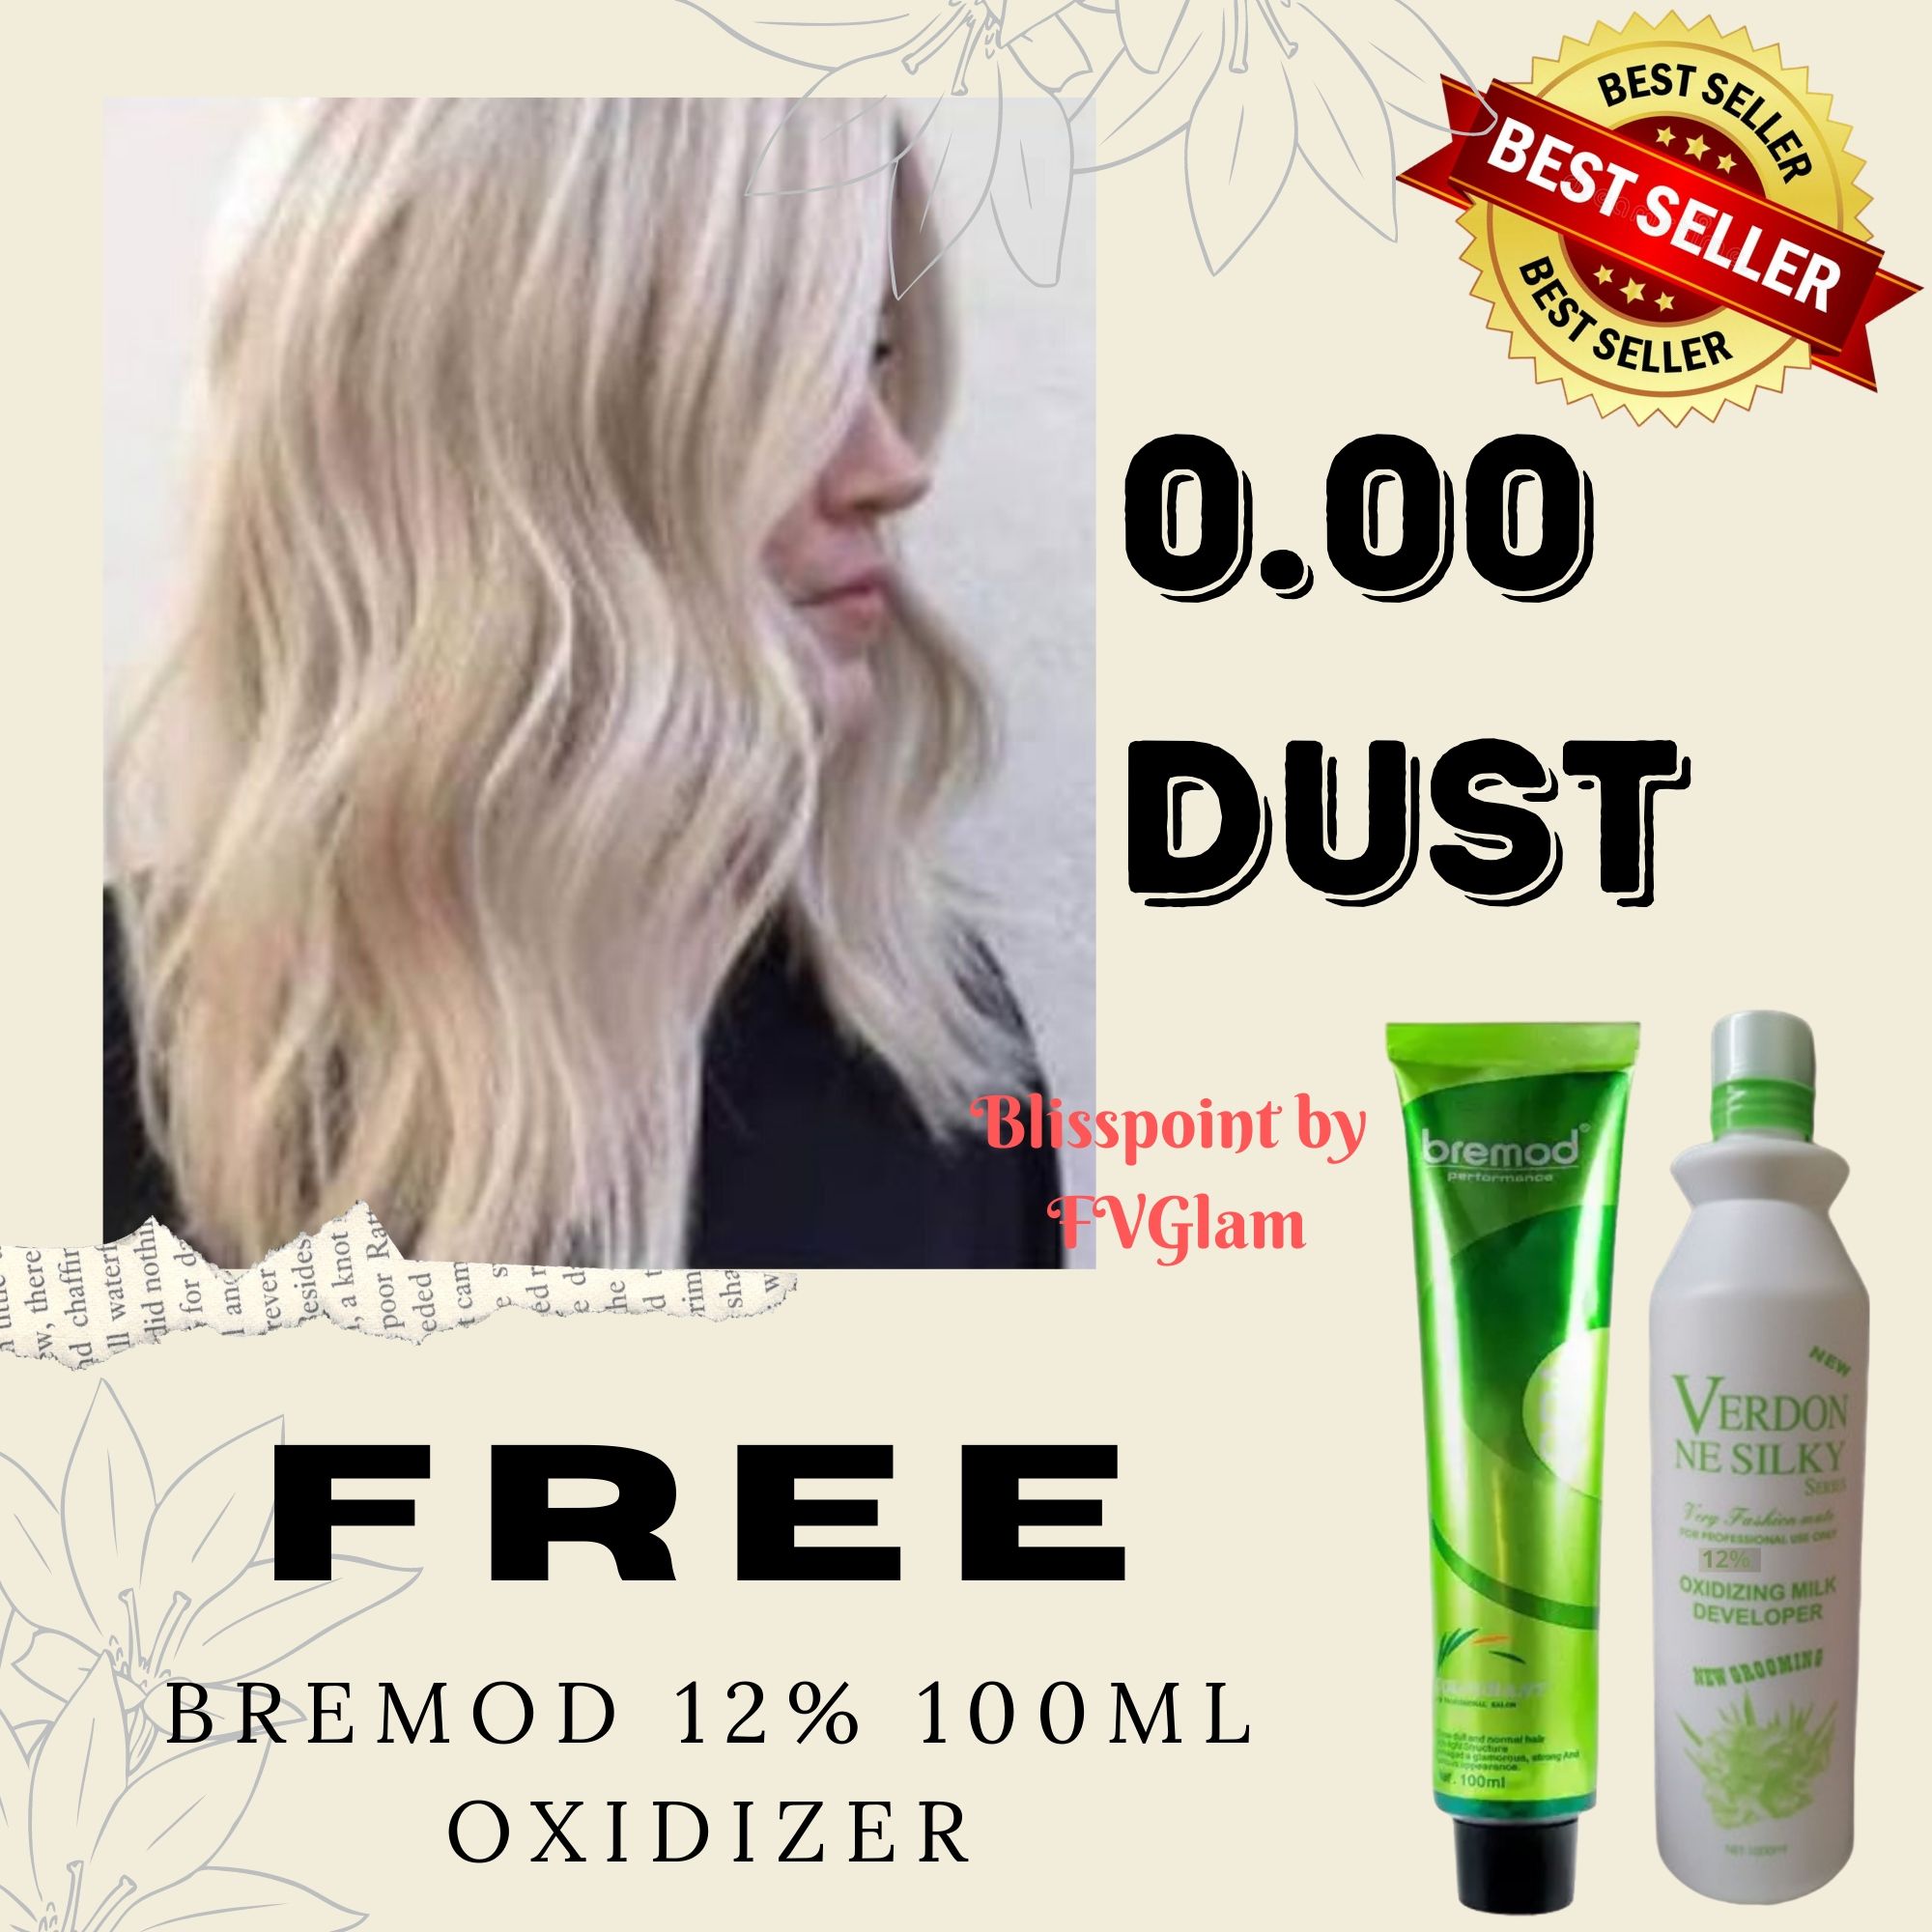 Bliss Point Bremod  + Verdon 12% 100ml Re-packed Oxidizer FREE - Dust  Bremod Performance Hair Color 100ML TUBE | Lazada PH